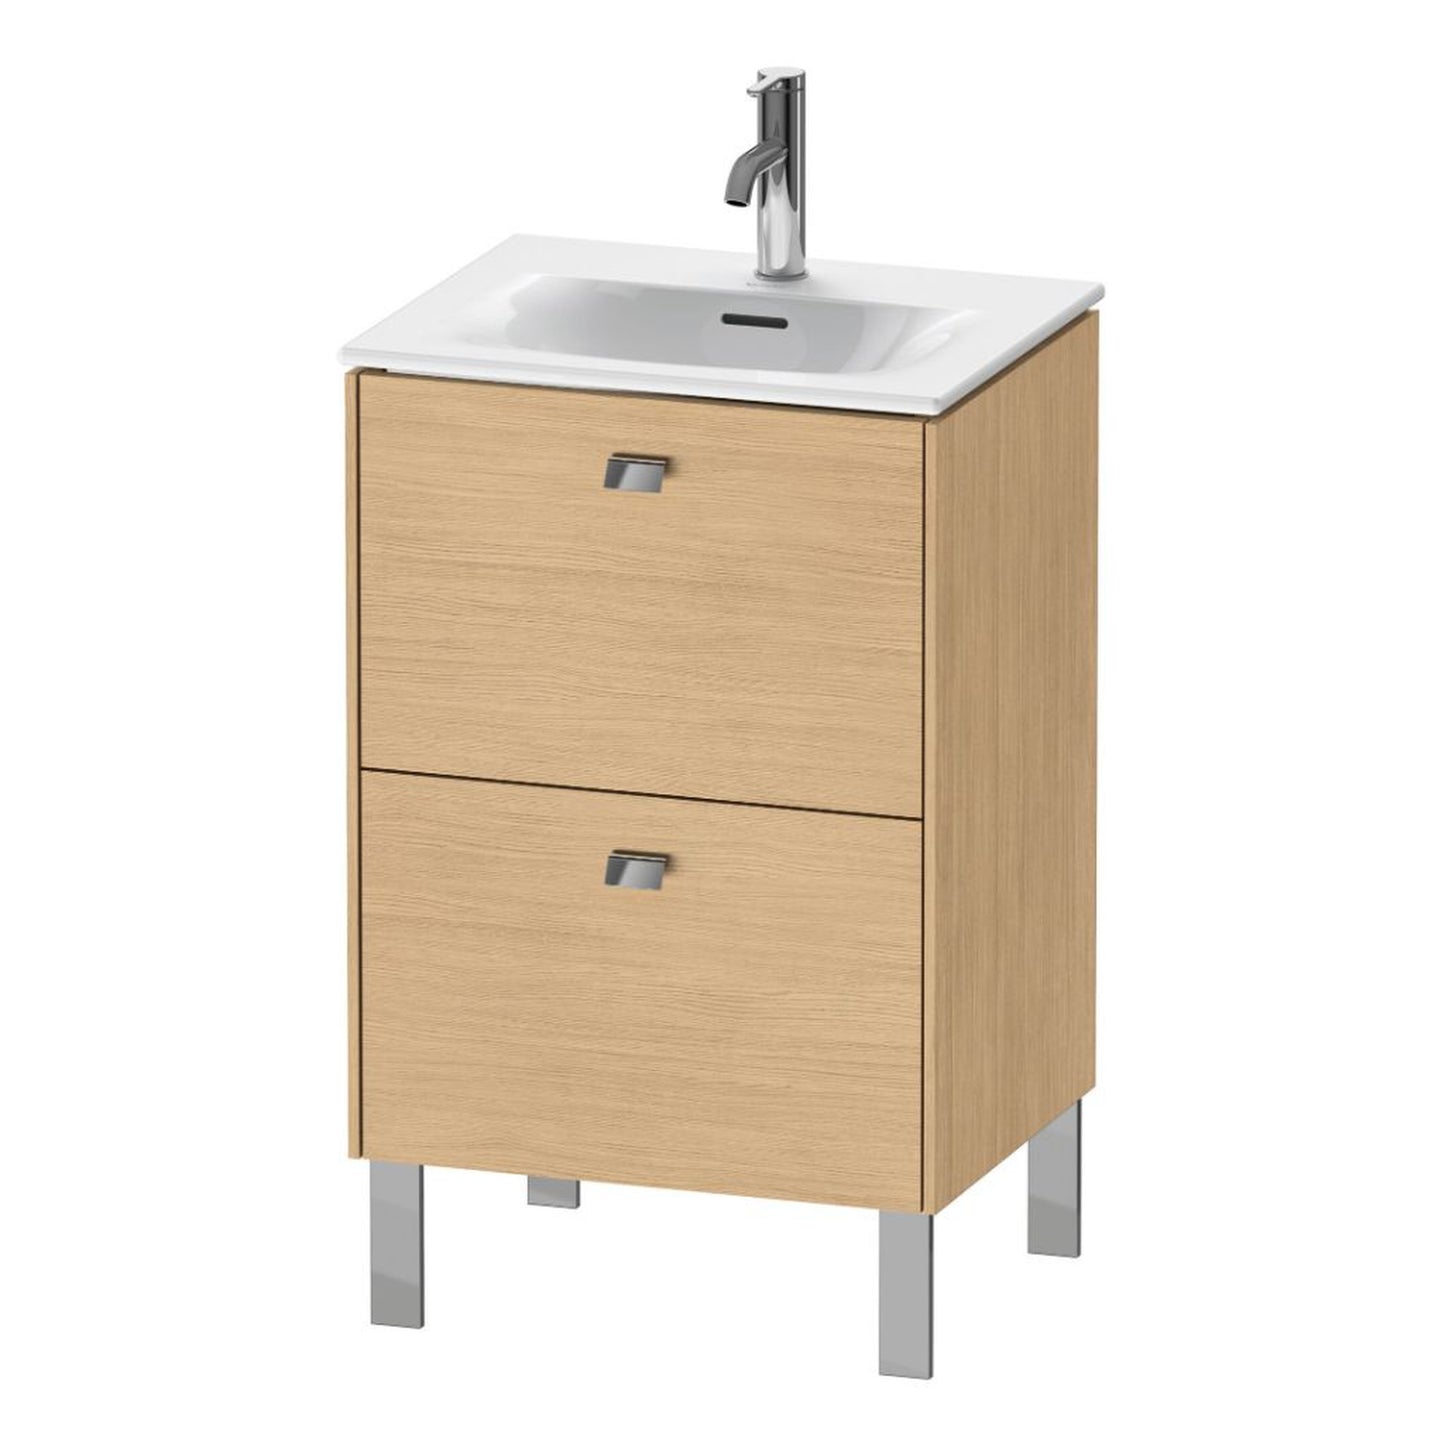 Duravit Brioso BR45090 20" x 27" x 16" Two Drawer Floor Standing Vanity Unit in Natural Oak and Chrome Handle